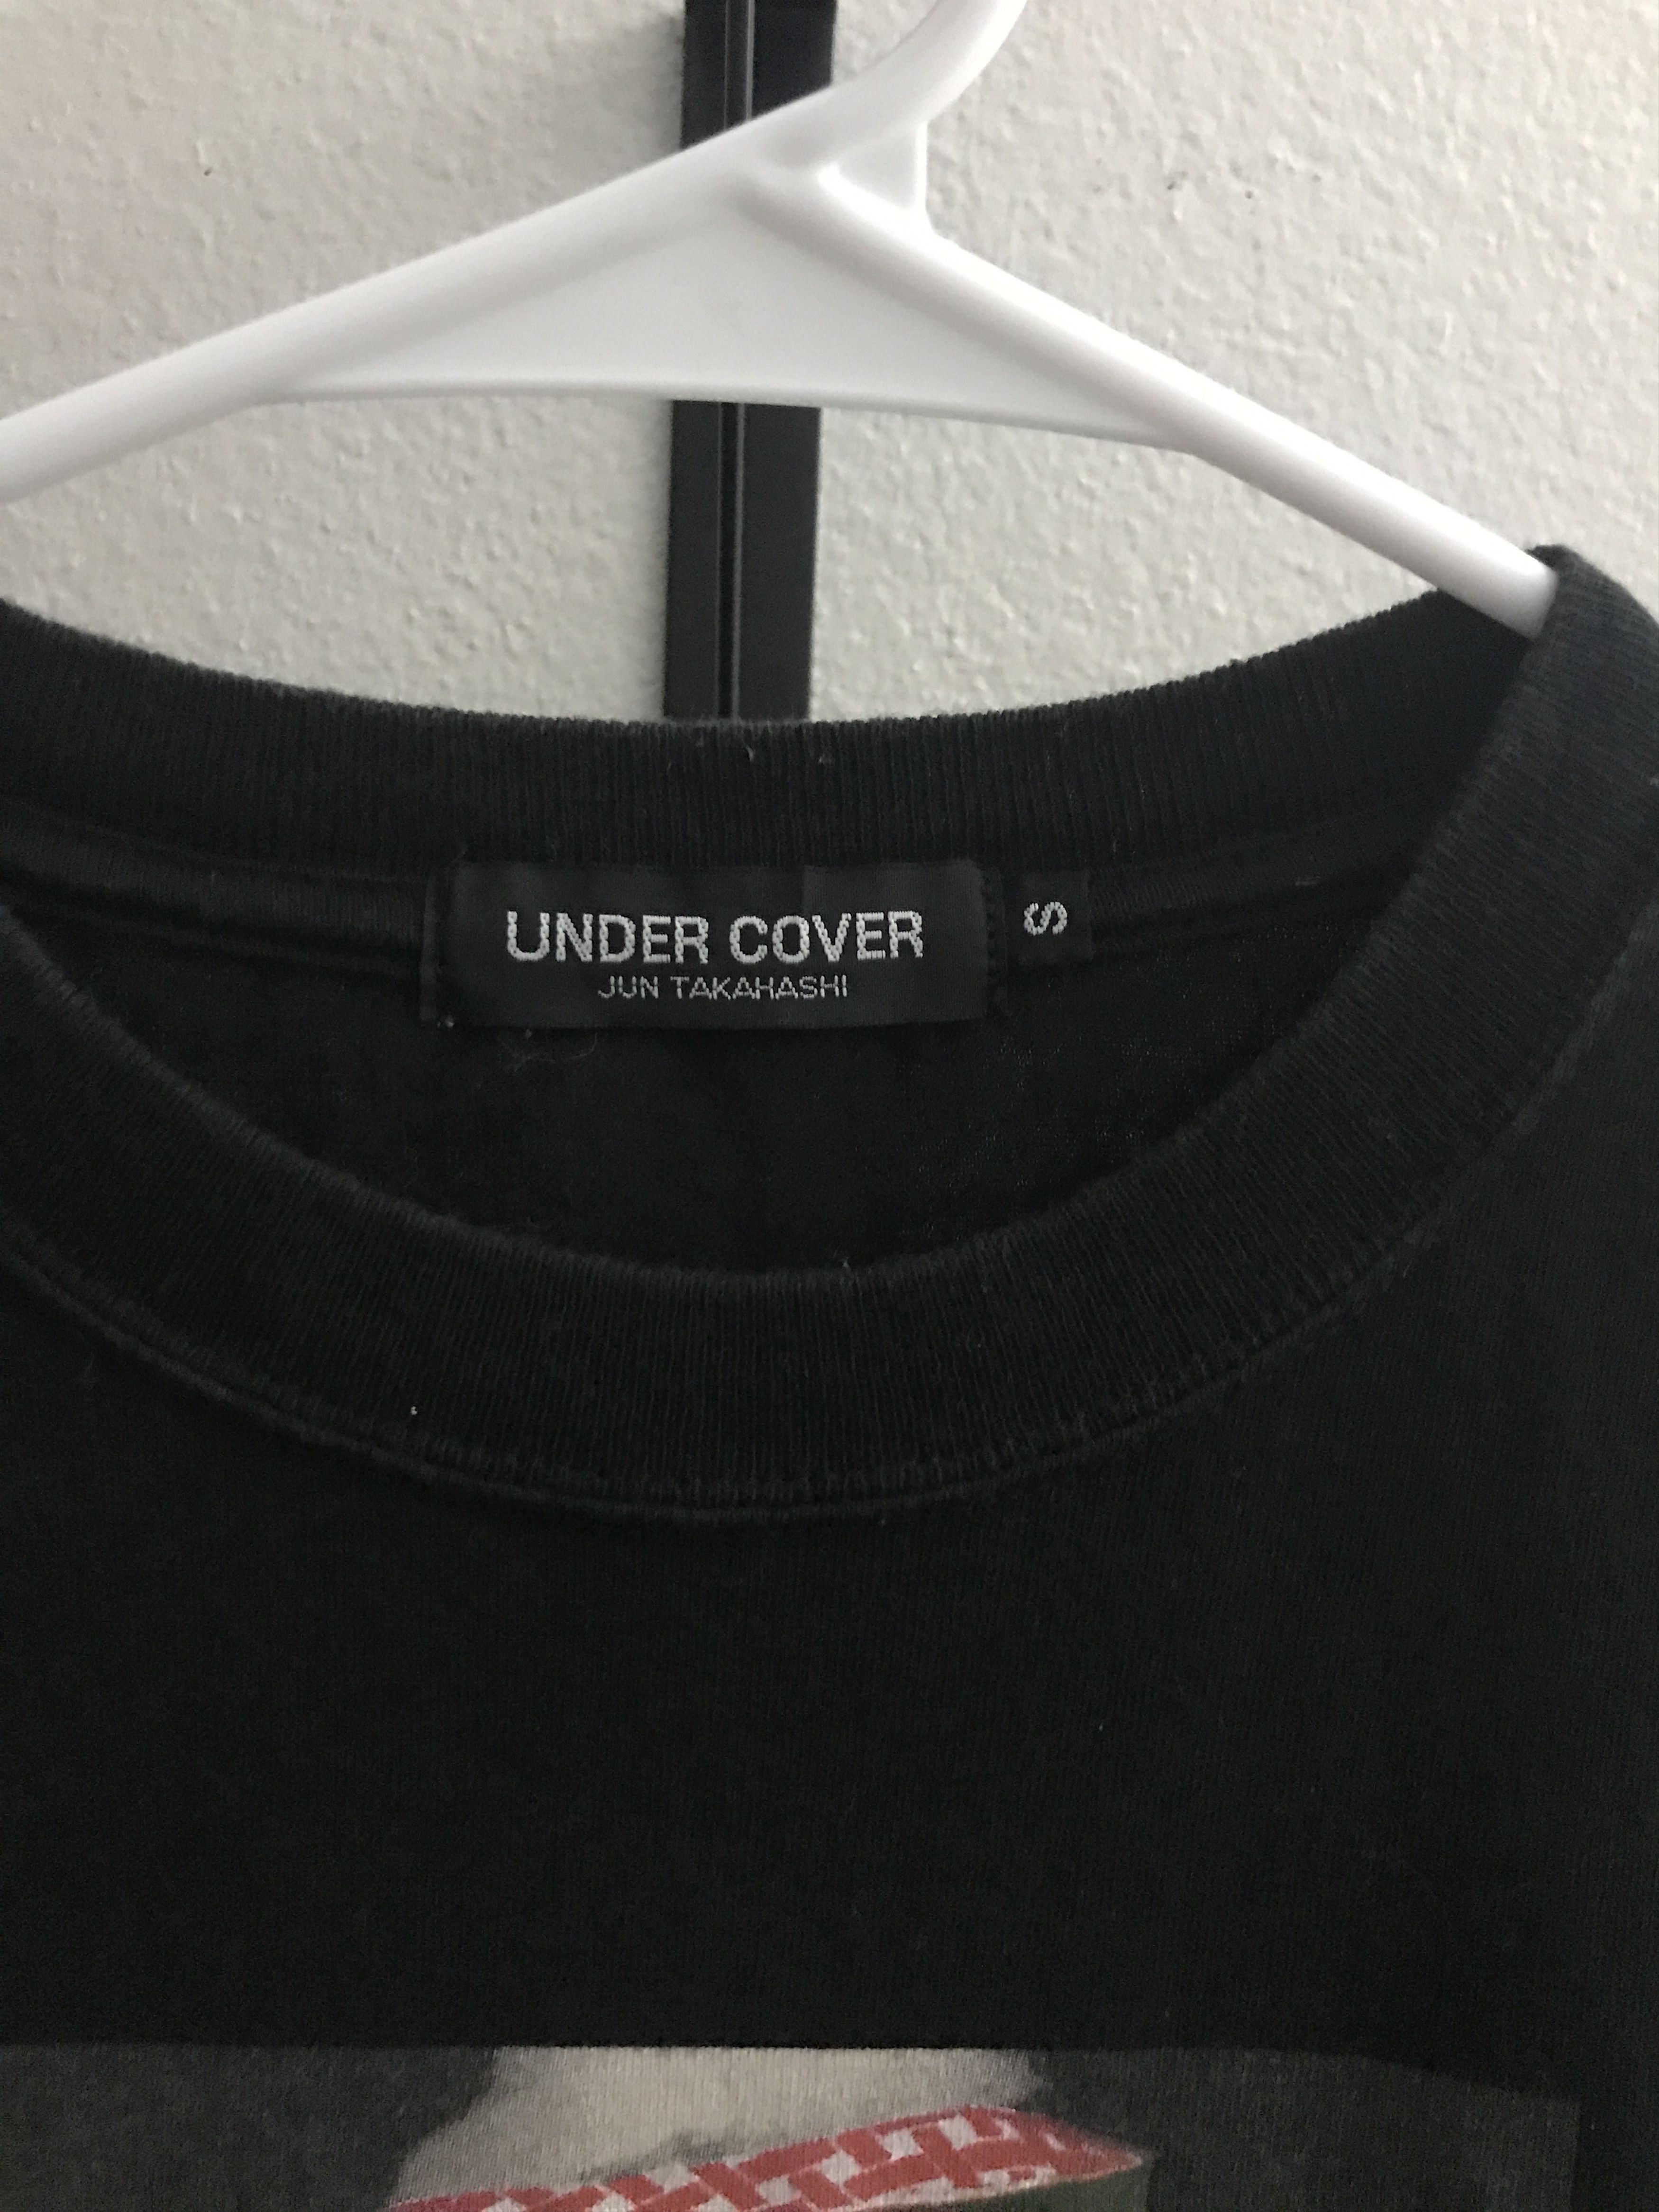 Undercover SS08 Summer Madness Tee in Black Size US S / EU 44-46 / 1 - 3 Thumbnail